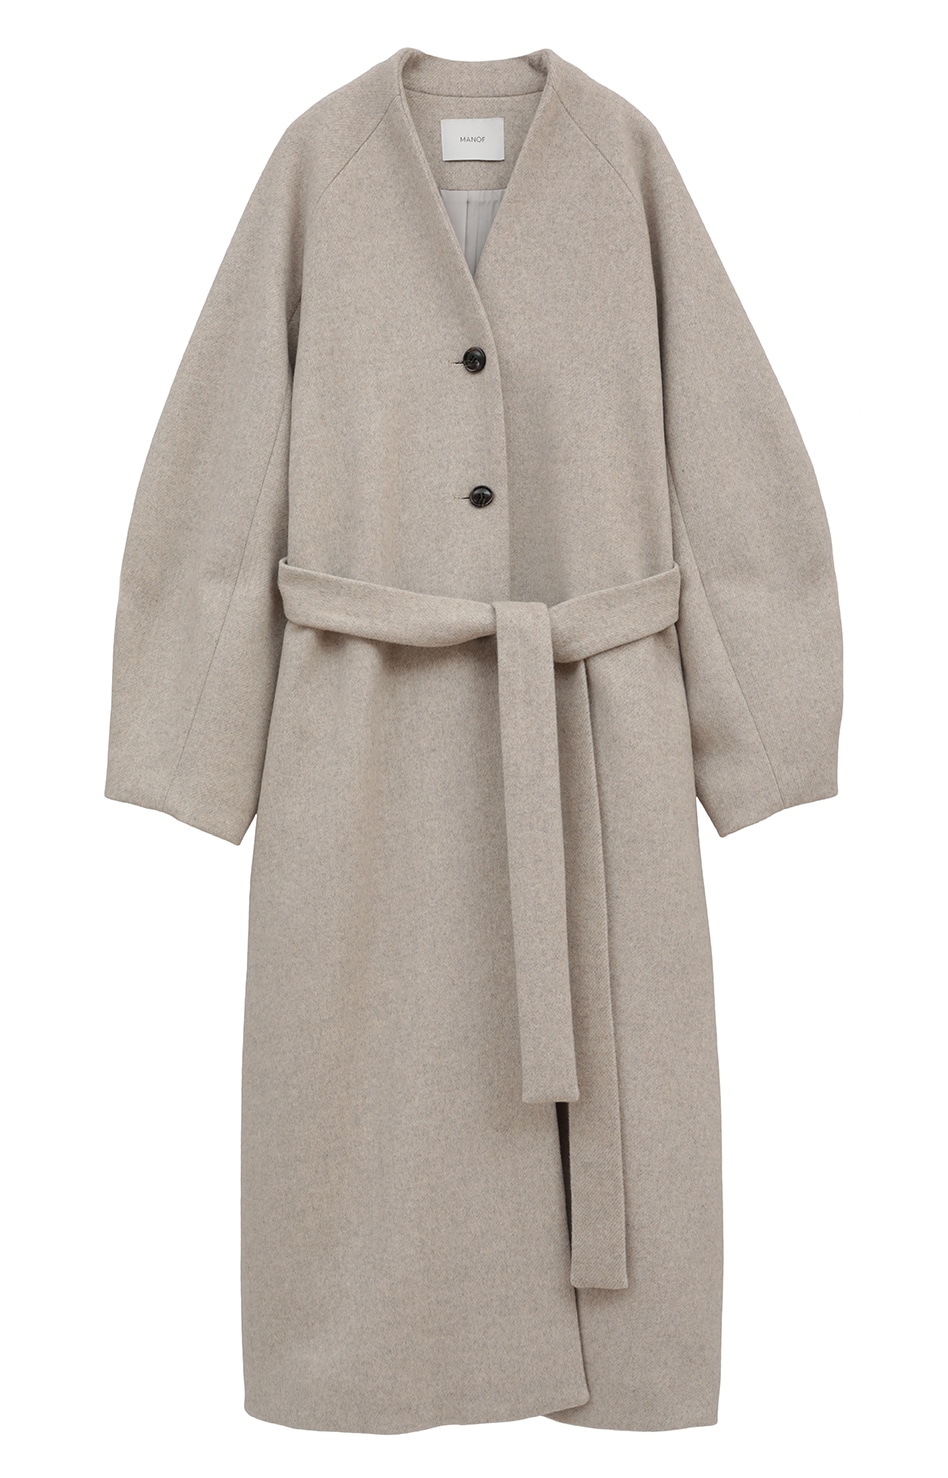 RAGLAN VOLUME SLEEVE COAT｜OUTER(アウター)｜CLANE OFFICIAL ONLINE ...